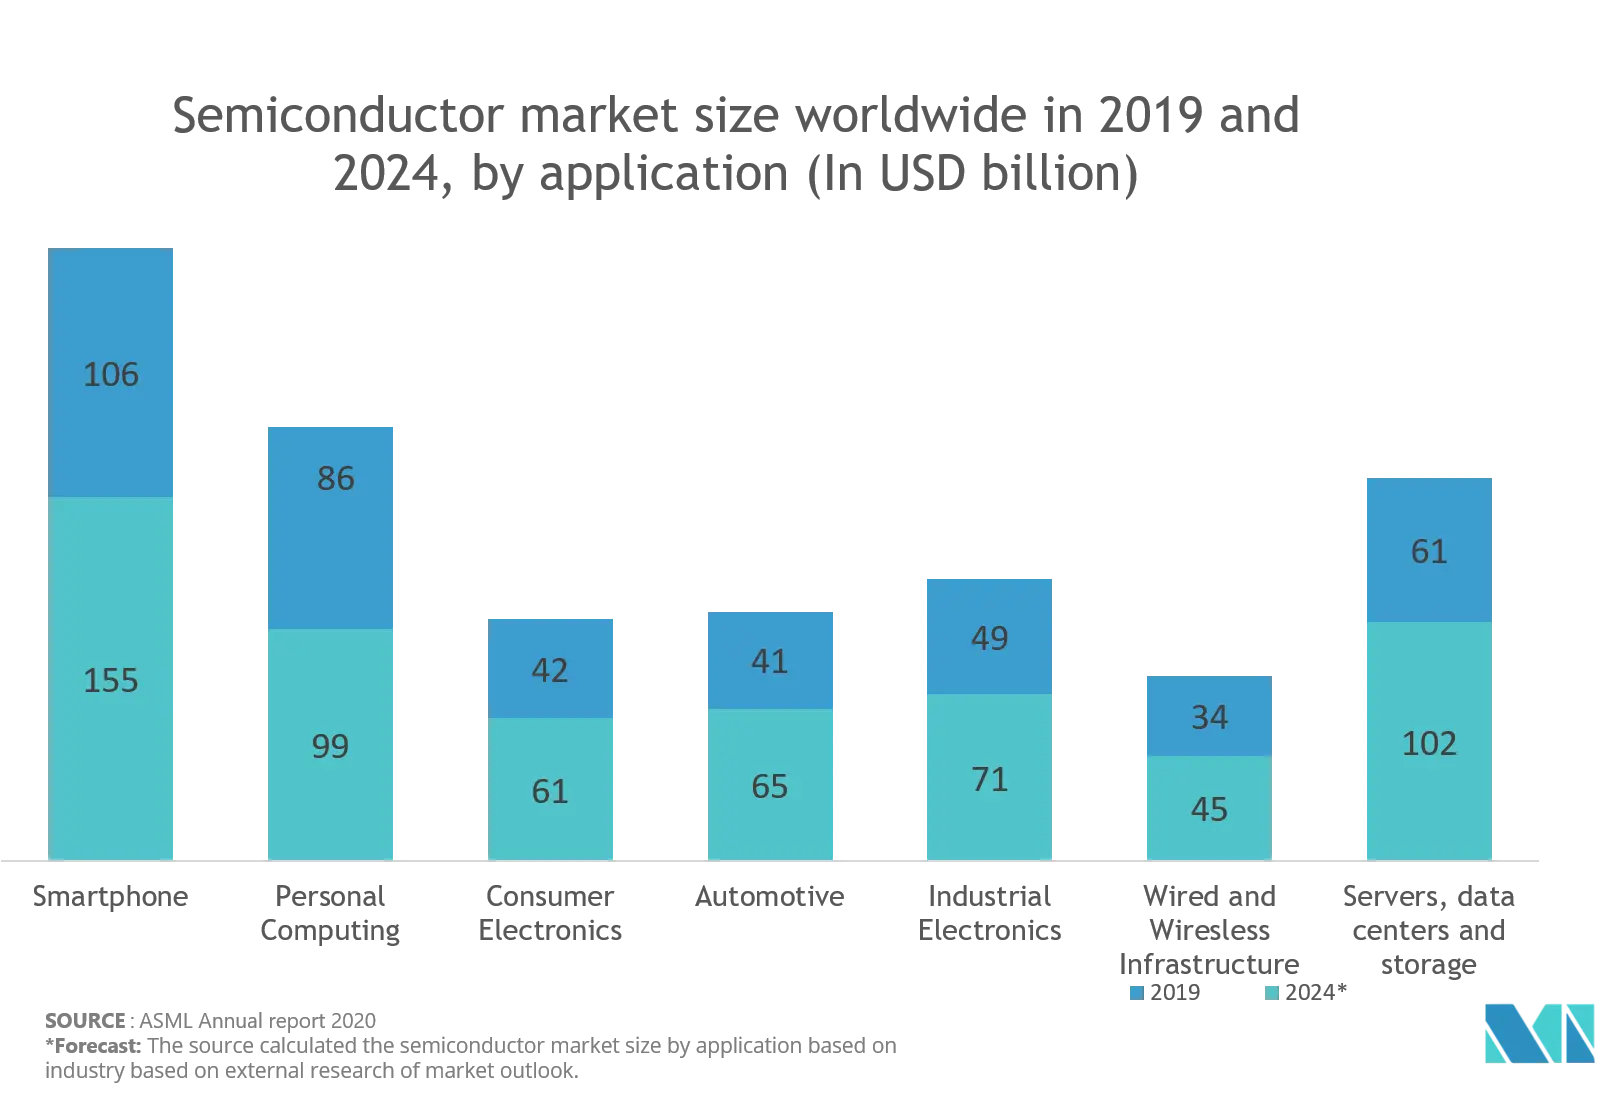 Smeiconductor market size graph.png